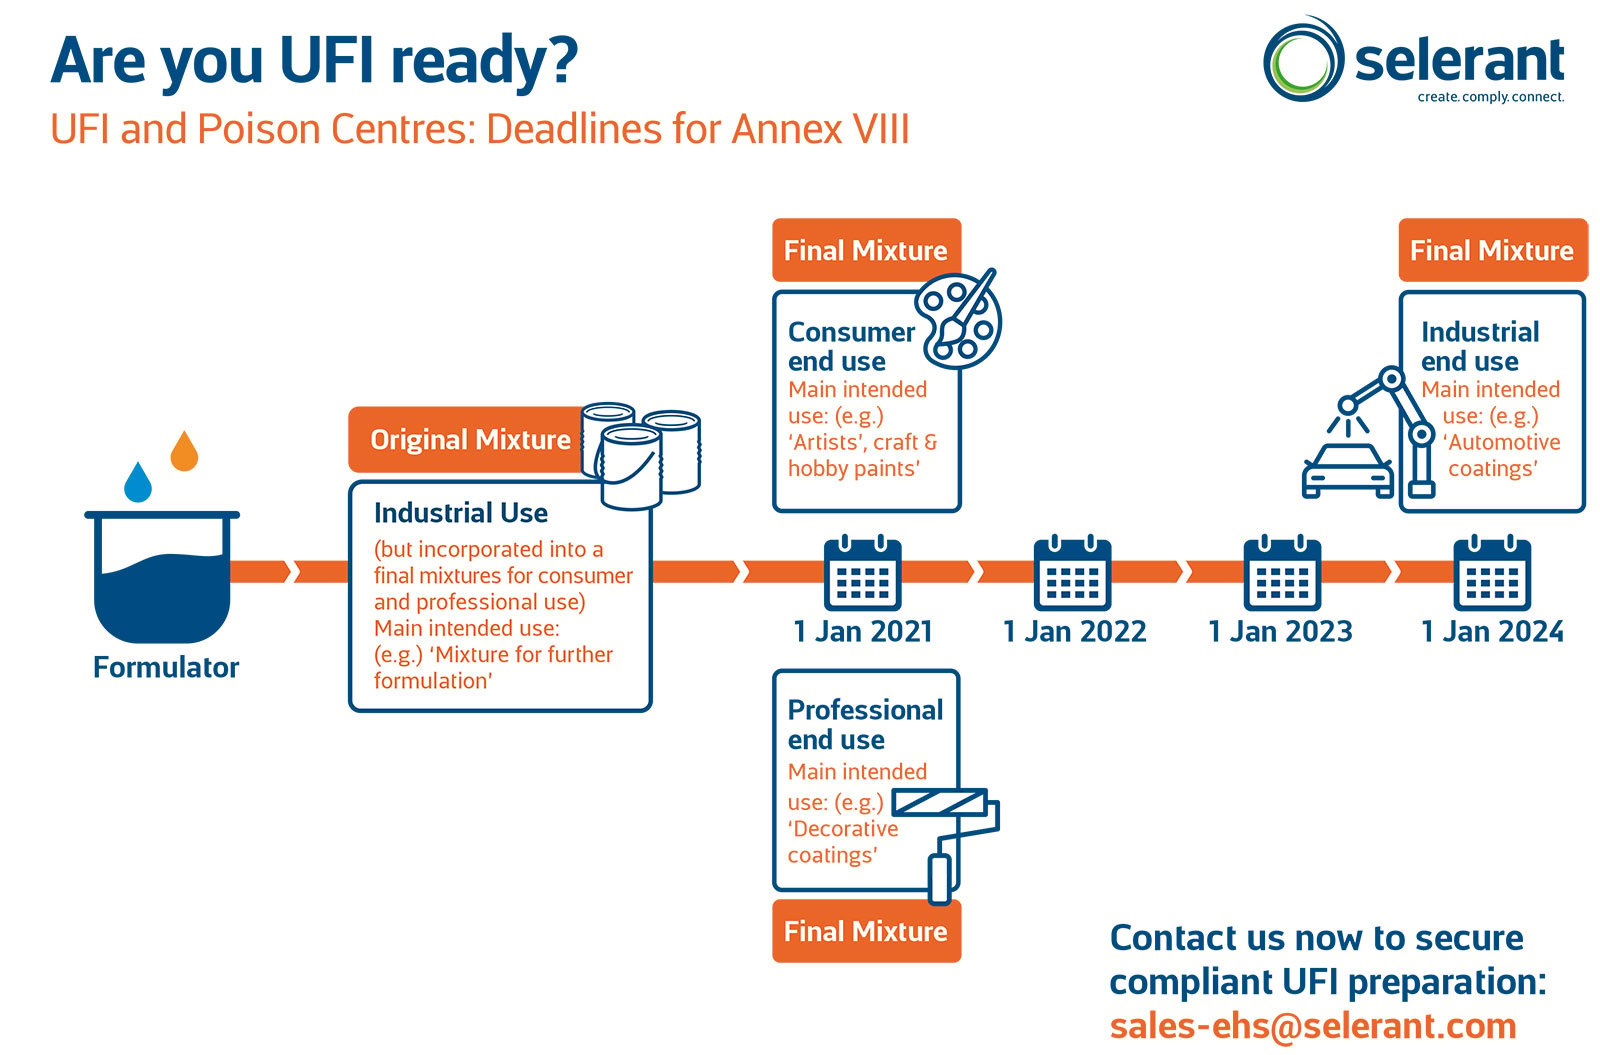 Are uou UFI ready? Act now before the deadline